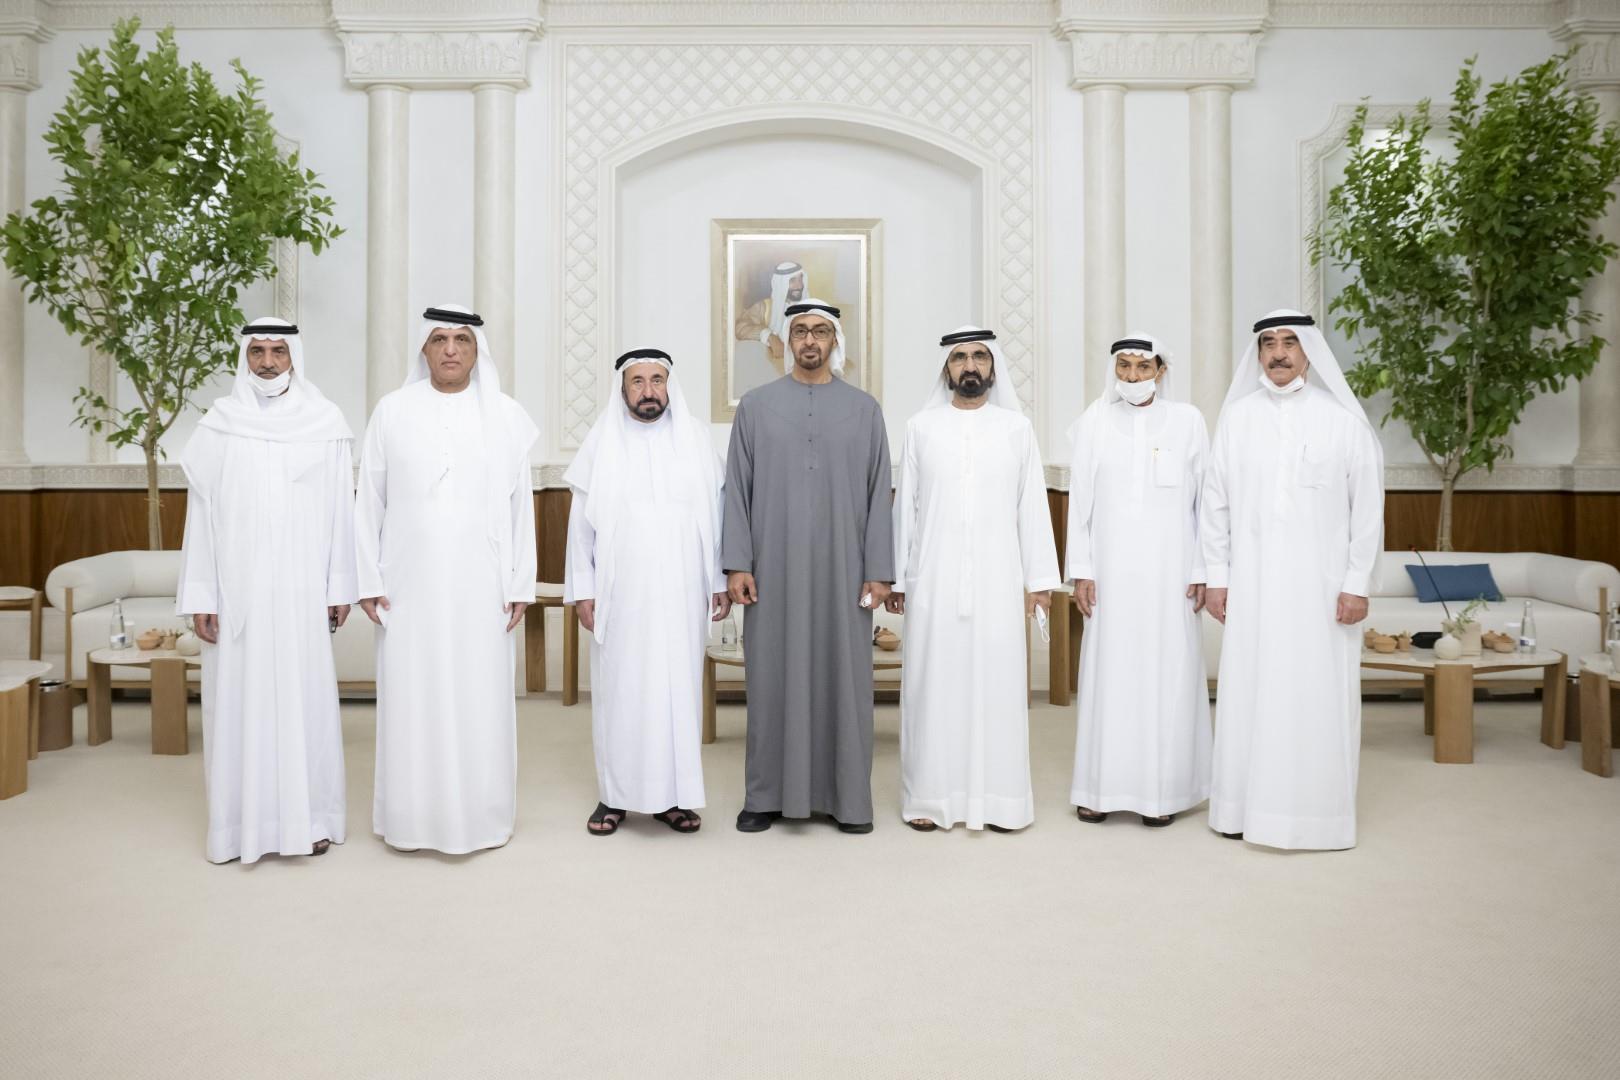 The Federal Supreme Court elects Mohamed bin Zayed as president of the UAE